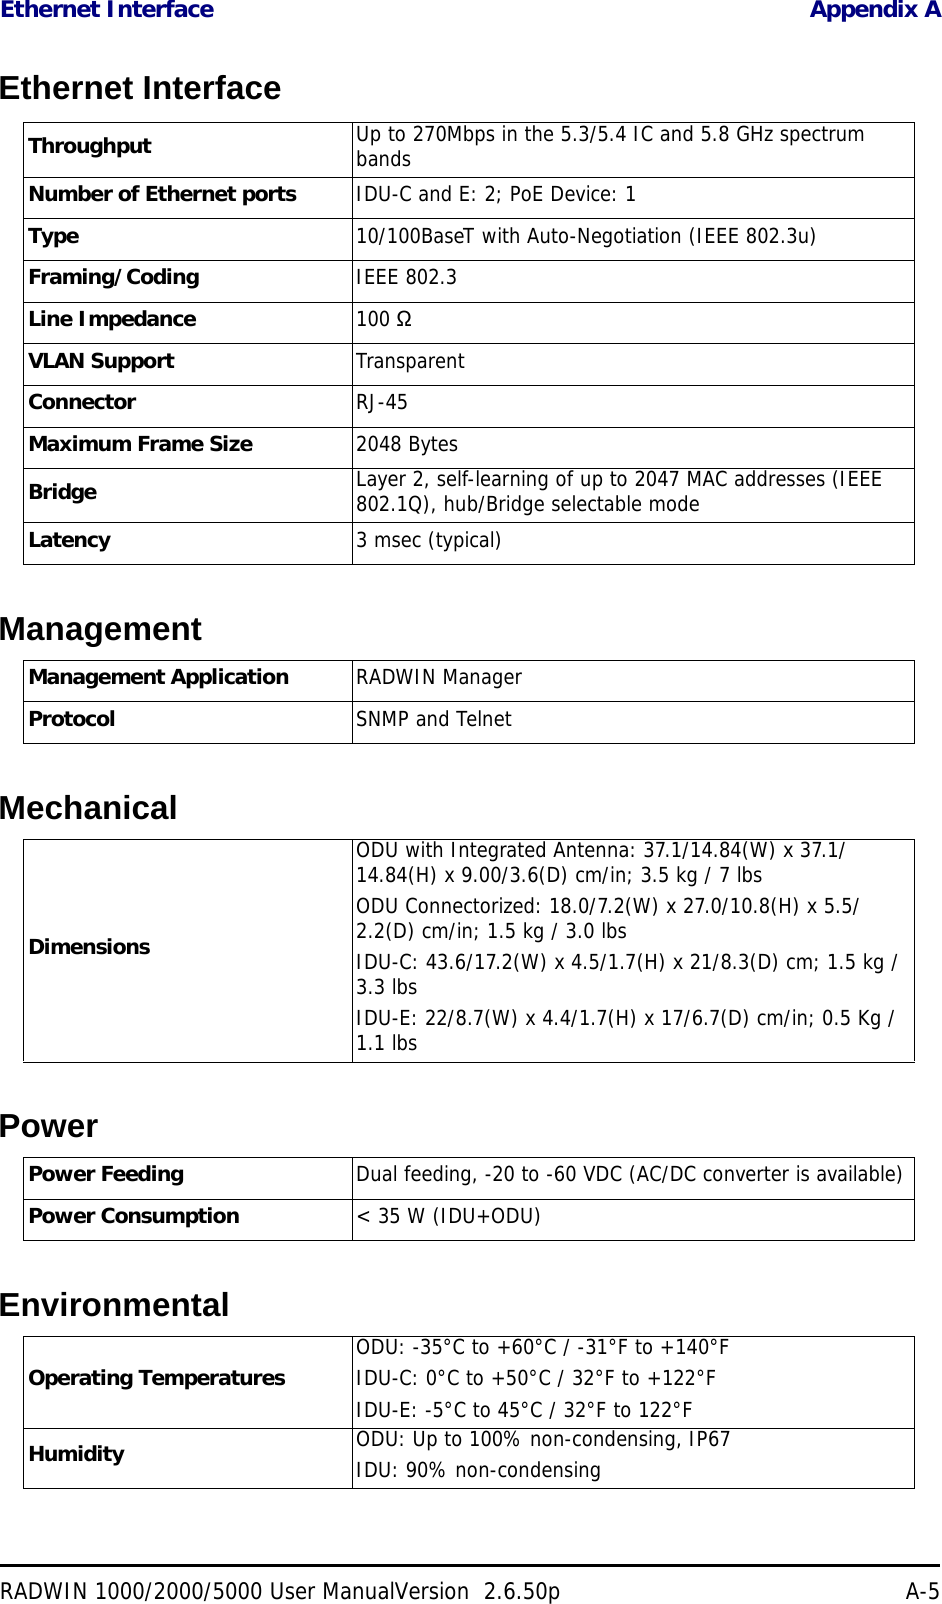 Ethernet Interface Appendix ARADWIN 1000/2000/5000 User ManualVersion  2.6.50p A-5Ethernet InterfaceManagementMechanicalPowerEnvironmentalThroughput Up to 270Mbps in the 5.3/5.4 IC and 5.8 GHz spectrum bandsNumber of Ethernet ports IDU-C and E: 2; PoE Device: 1Type 10/100BaseT with Auto-Negotiation (IEEE 802.3u)Framing/Coding IEEE 802.3Line Impedance 100 ΩVLAN Support TransparentConnector RJ-45Maximum Frame Size 2048 BytesBridge Layer 2, self-learning of up to 2047 MAC addresses (IEEE 802.1Q), hub/Bridge selectable modeLatency 3 msec (typical)Management Application RADWIN ManagerProtocol SNMP and TelnetDimensionsODU with Integrated Antenna: 37.1/14.84(W) x 37.1/14.84(H) x 9.00/3.6(D) cm/in; 3.5 kg / 7 lbsODU Connectorized: 18.0/7.2(W) x 27.0/10.8(H) x 5.5/2.2(D) cm/in; 1.5 kg / 3.0 lbsIDU-C: 43.6/17.2(W) x 4.5/1.7(H) x 21/8.3(D) cm; 1.5 kg / 3.3 lbsIDU-E: 22/8.7(W) x 4.4/1.7(H) x 17/6.7(D) cm/in; 0.5 Kg / 1.1 lbsPower Feeding Dual feeding, -20 to -60 VDC (AC/DC converter is available)Power Consumption &lt; 35 W (IDU+ODU)Operating Temperatures ODU: -35°C to +60°C / -31°F to +140°FIDU-C: 0°C to +50°C / 32°F to +122°FIDU-E: -5°C to 45°C / 32°F to 122°FHumidity ODU: Up to 100% non-condensing, IP67IDU: 90% non-condensing